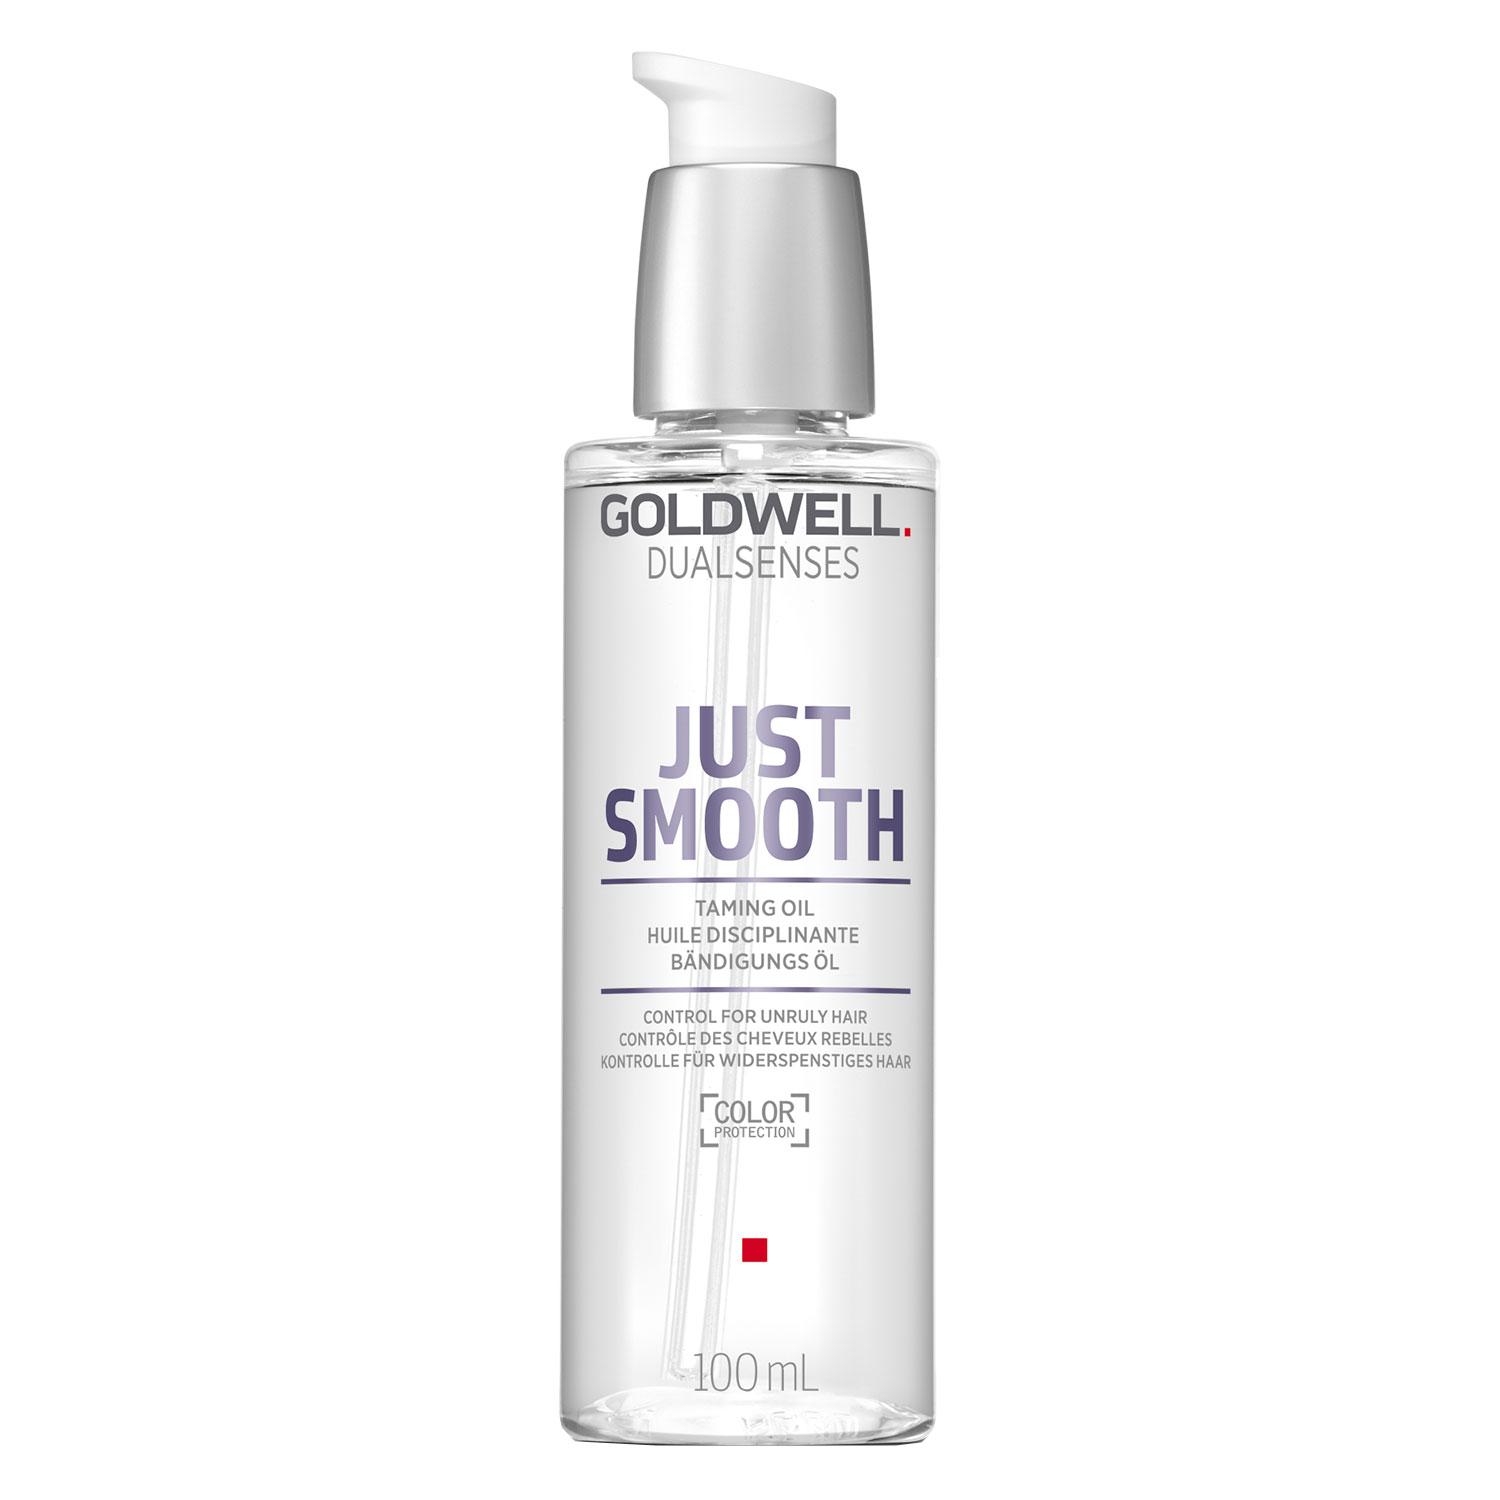 Dualsenses Just Smooth - Taming Oil